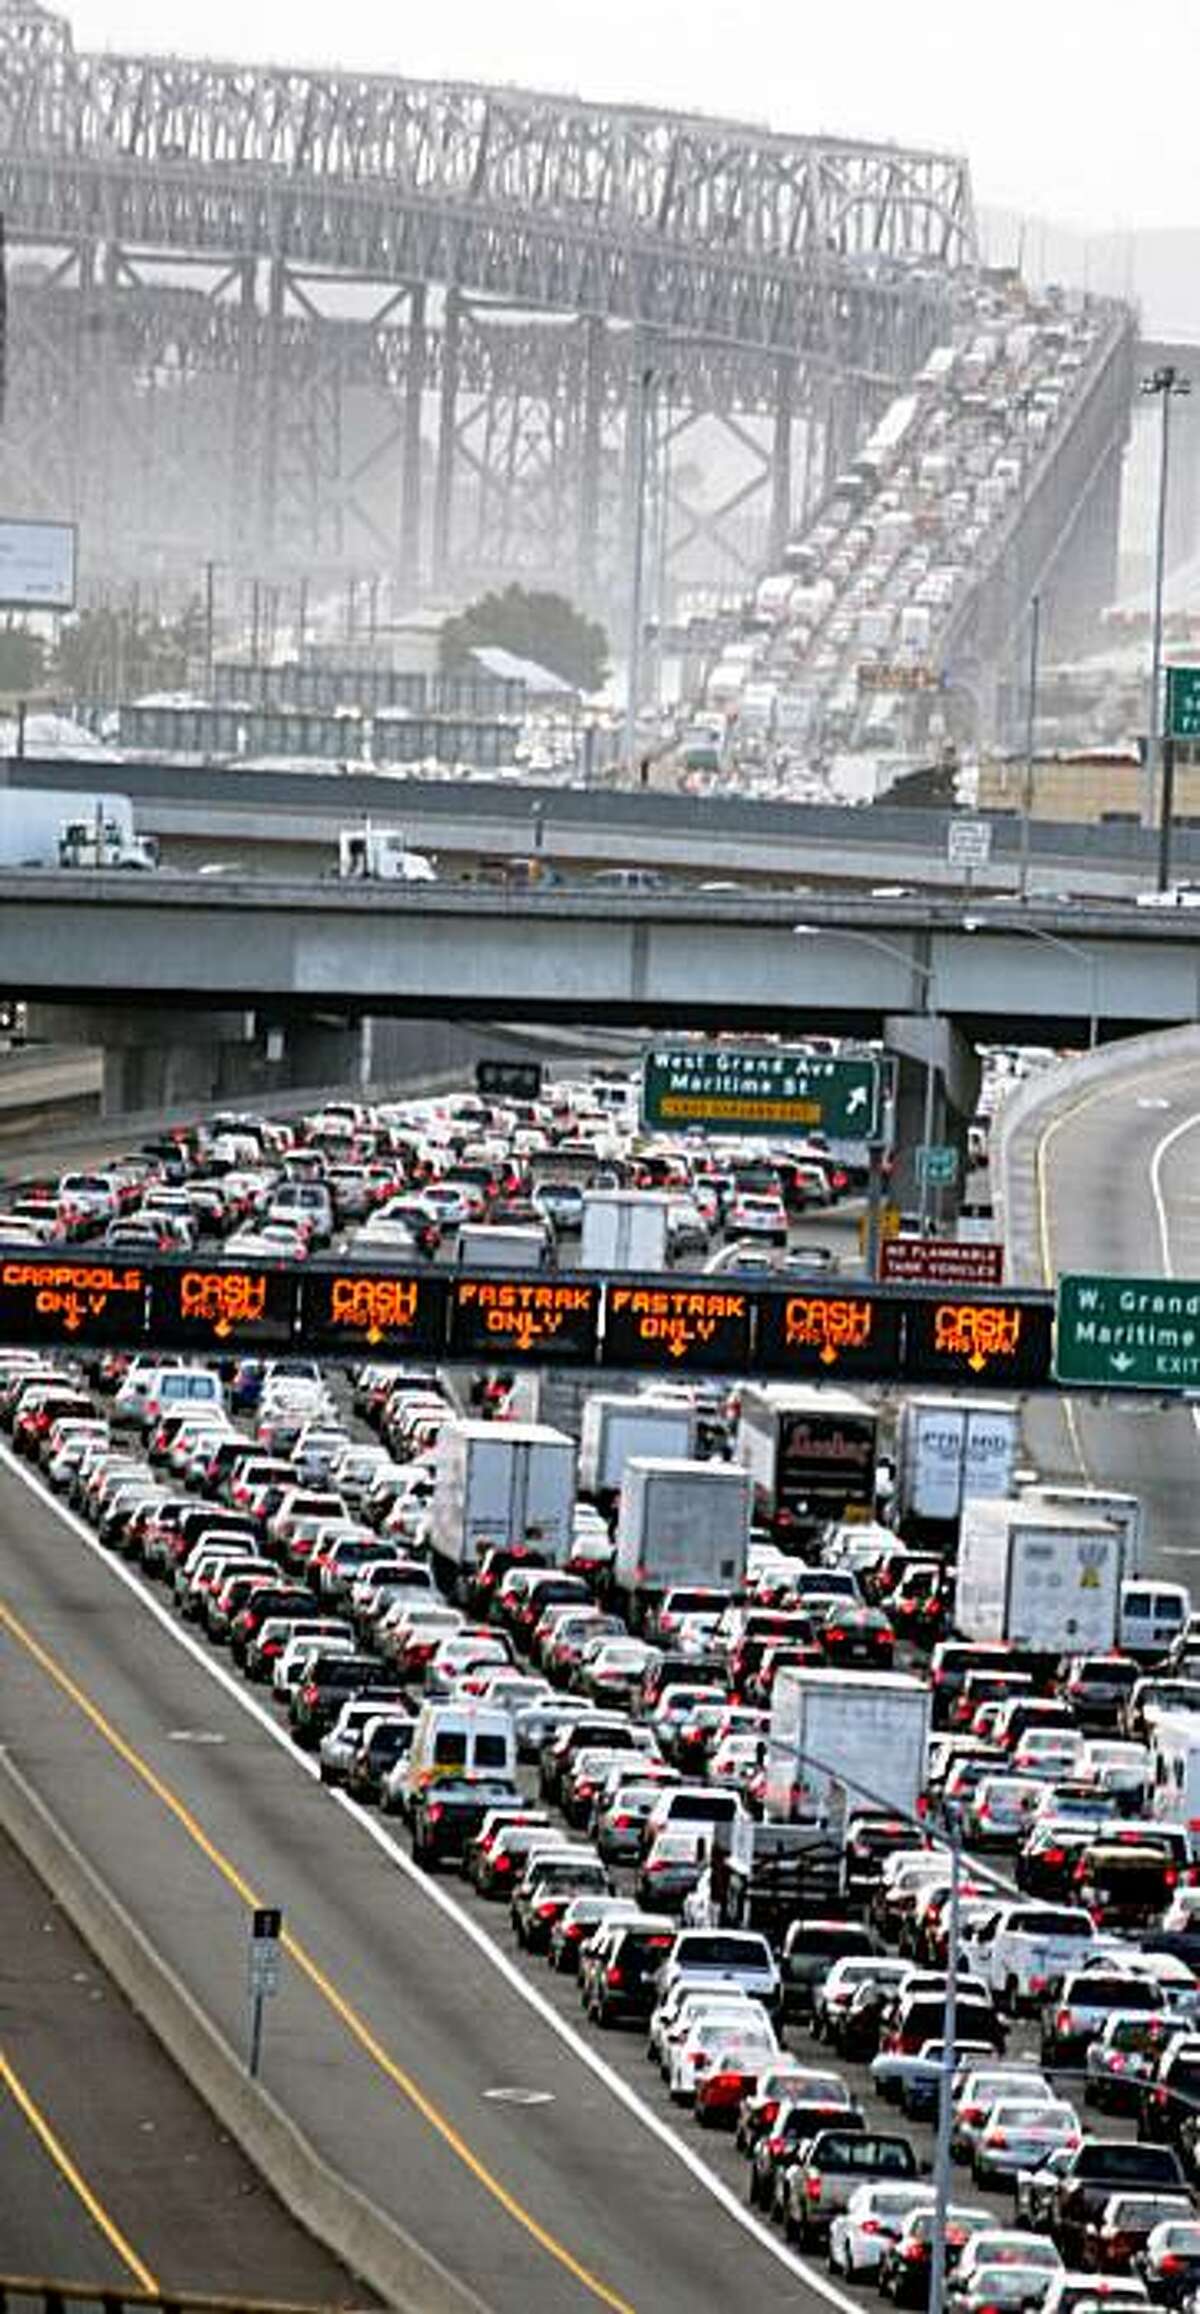 Hundreds of west bound commuters sit a wait on I-80 at the Bay Bridge approach to the toll booths after a big rig overturned on the westbound Bay Bridge just east of Yerba Buena Island Wednesday Oct 14, 2009. The accident blocked four of five lanes into San Francisco. The Safeway truck filled with food was reported on its side on the new S curve of the upper deck at 2:33 p.m. CHP reports that Debris spilled from the truck as it crashed compounding the clean up.